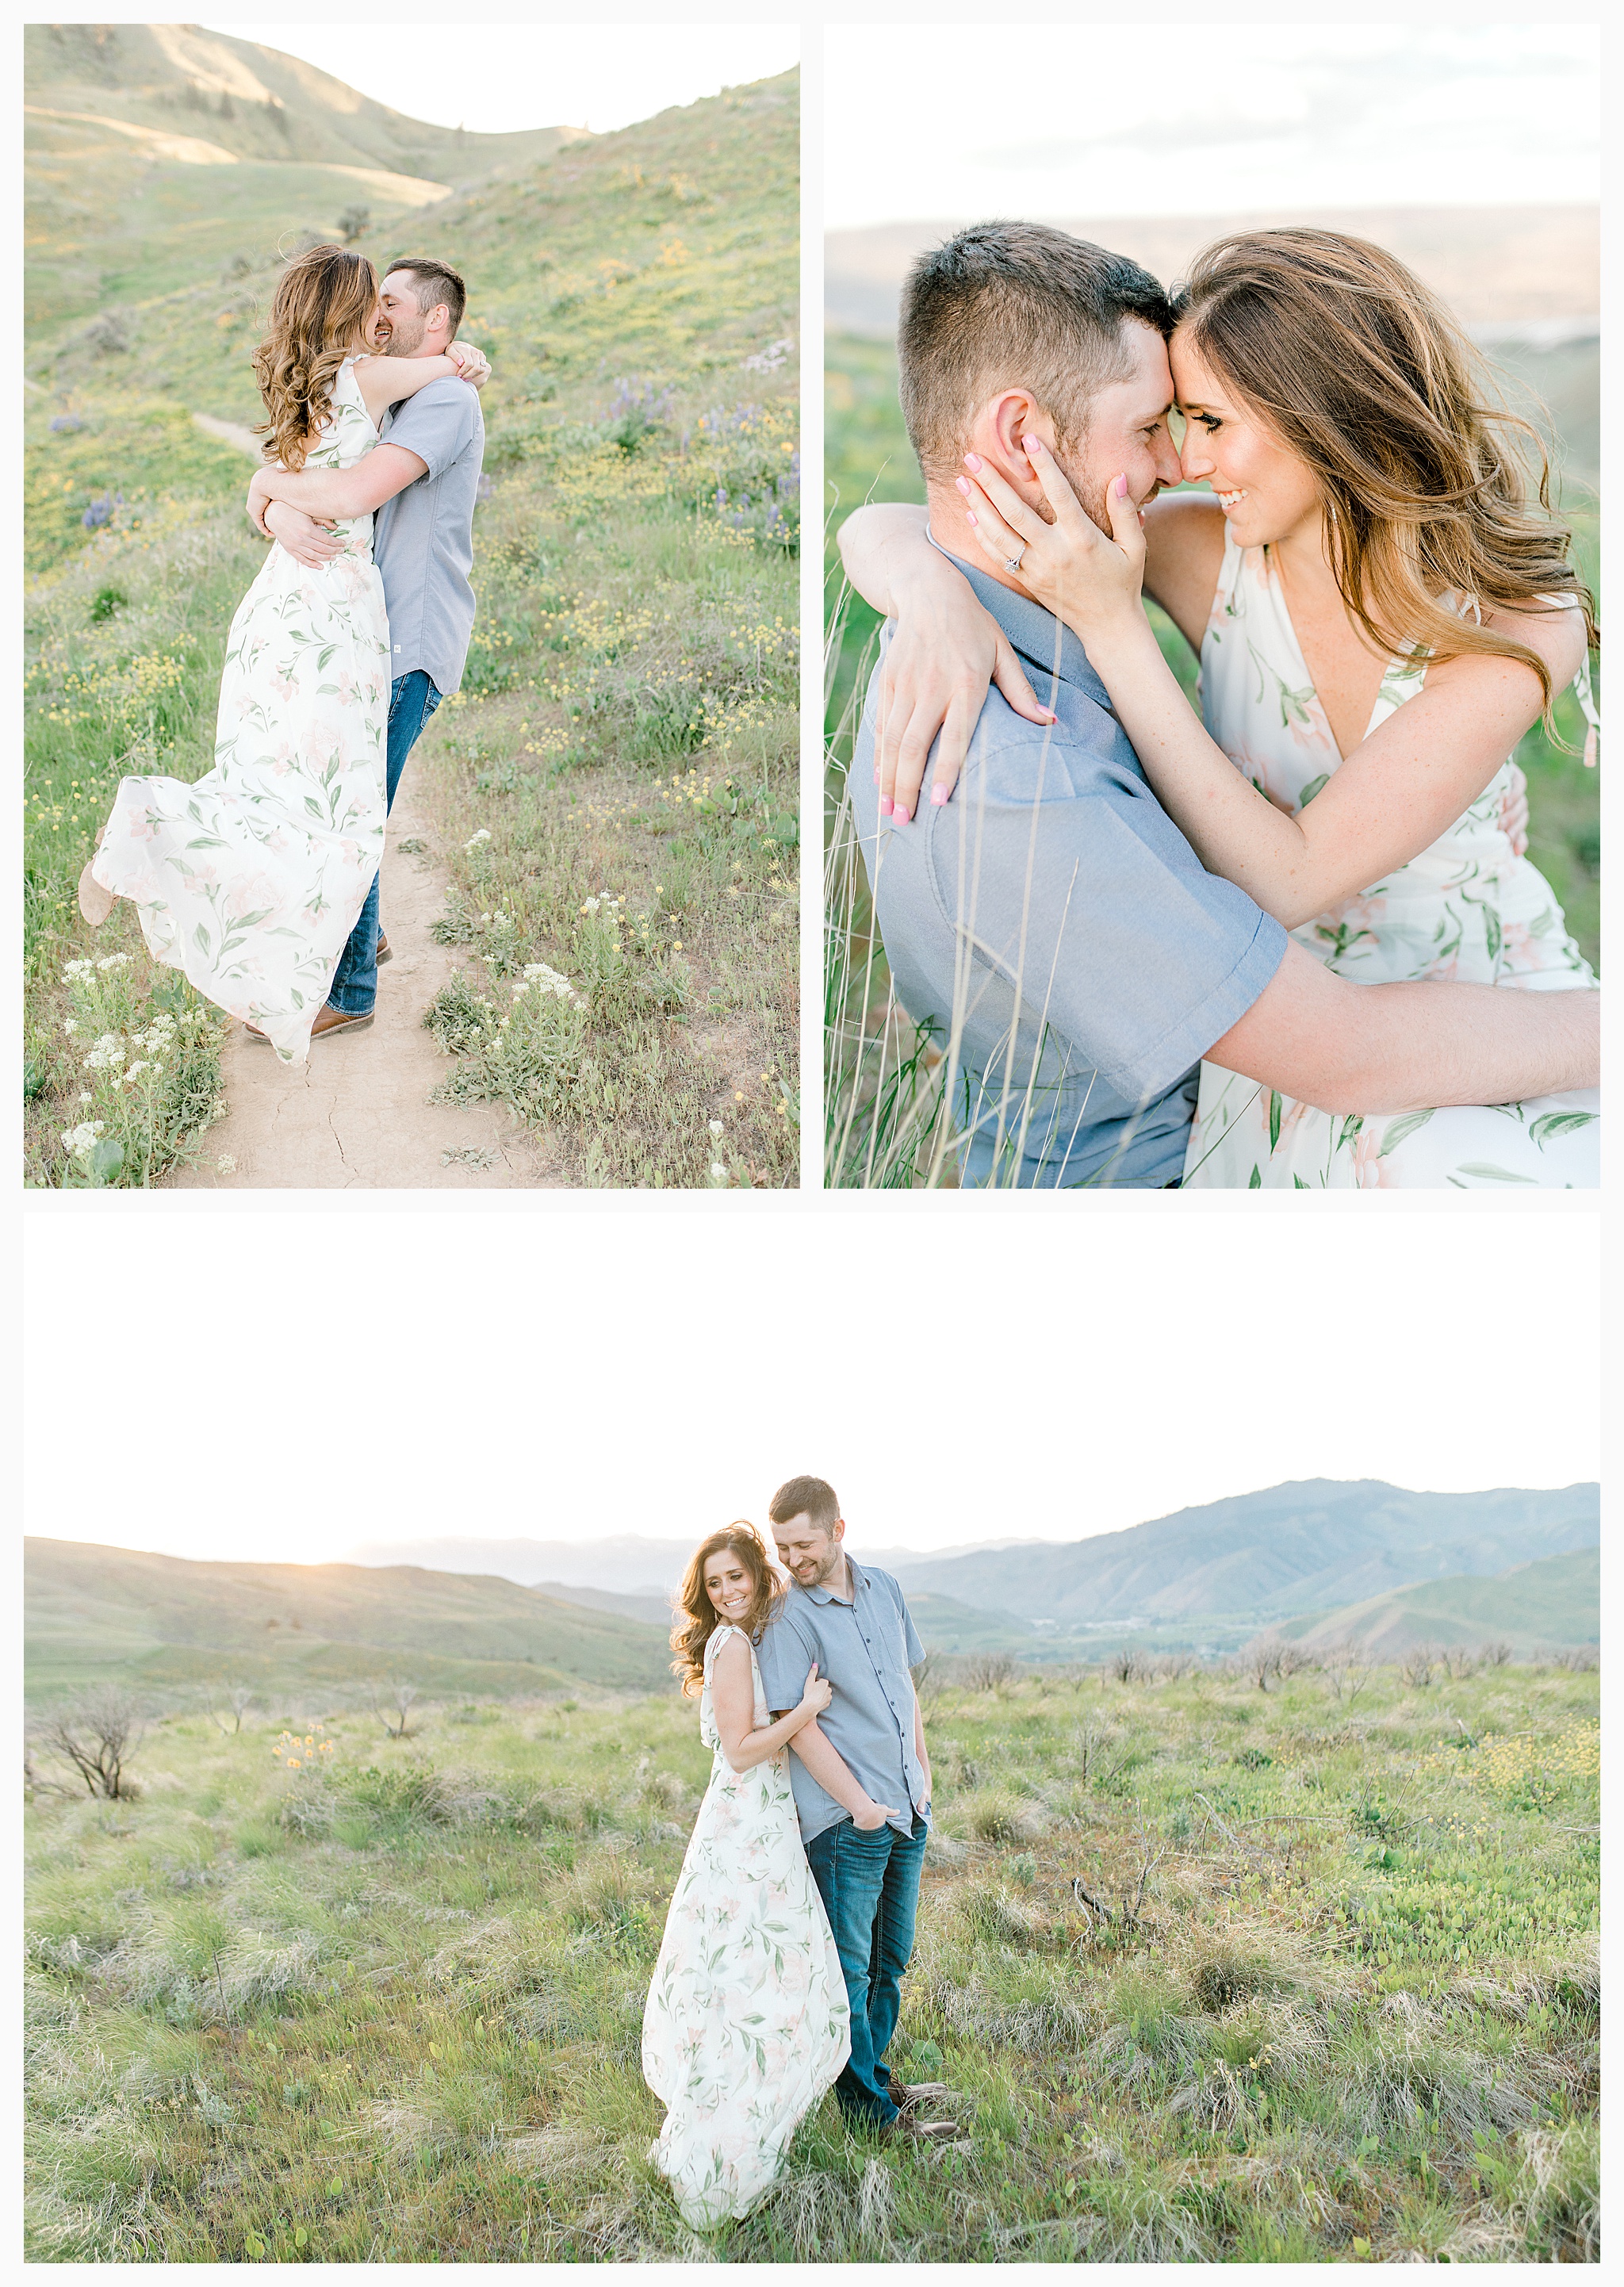 Engagement session amongst the wildflowers in Wenatchee, Washington | Engagement Session Outfit Inspiration for Wedding Photography with Emma Rose Company | Light and Airy PNW Photographer, Seattle Bride_0017.jpg